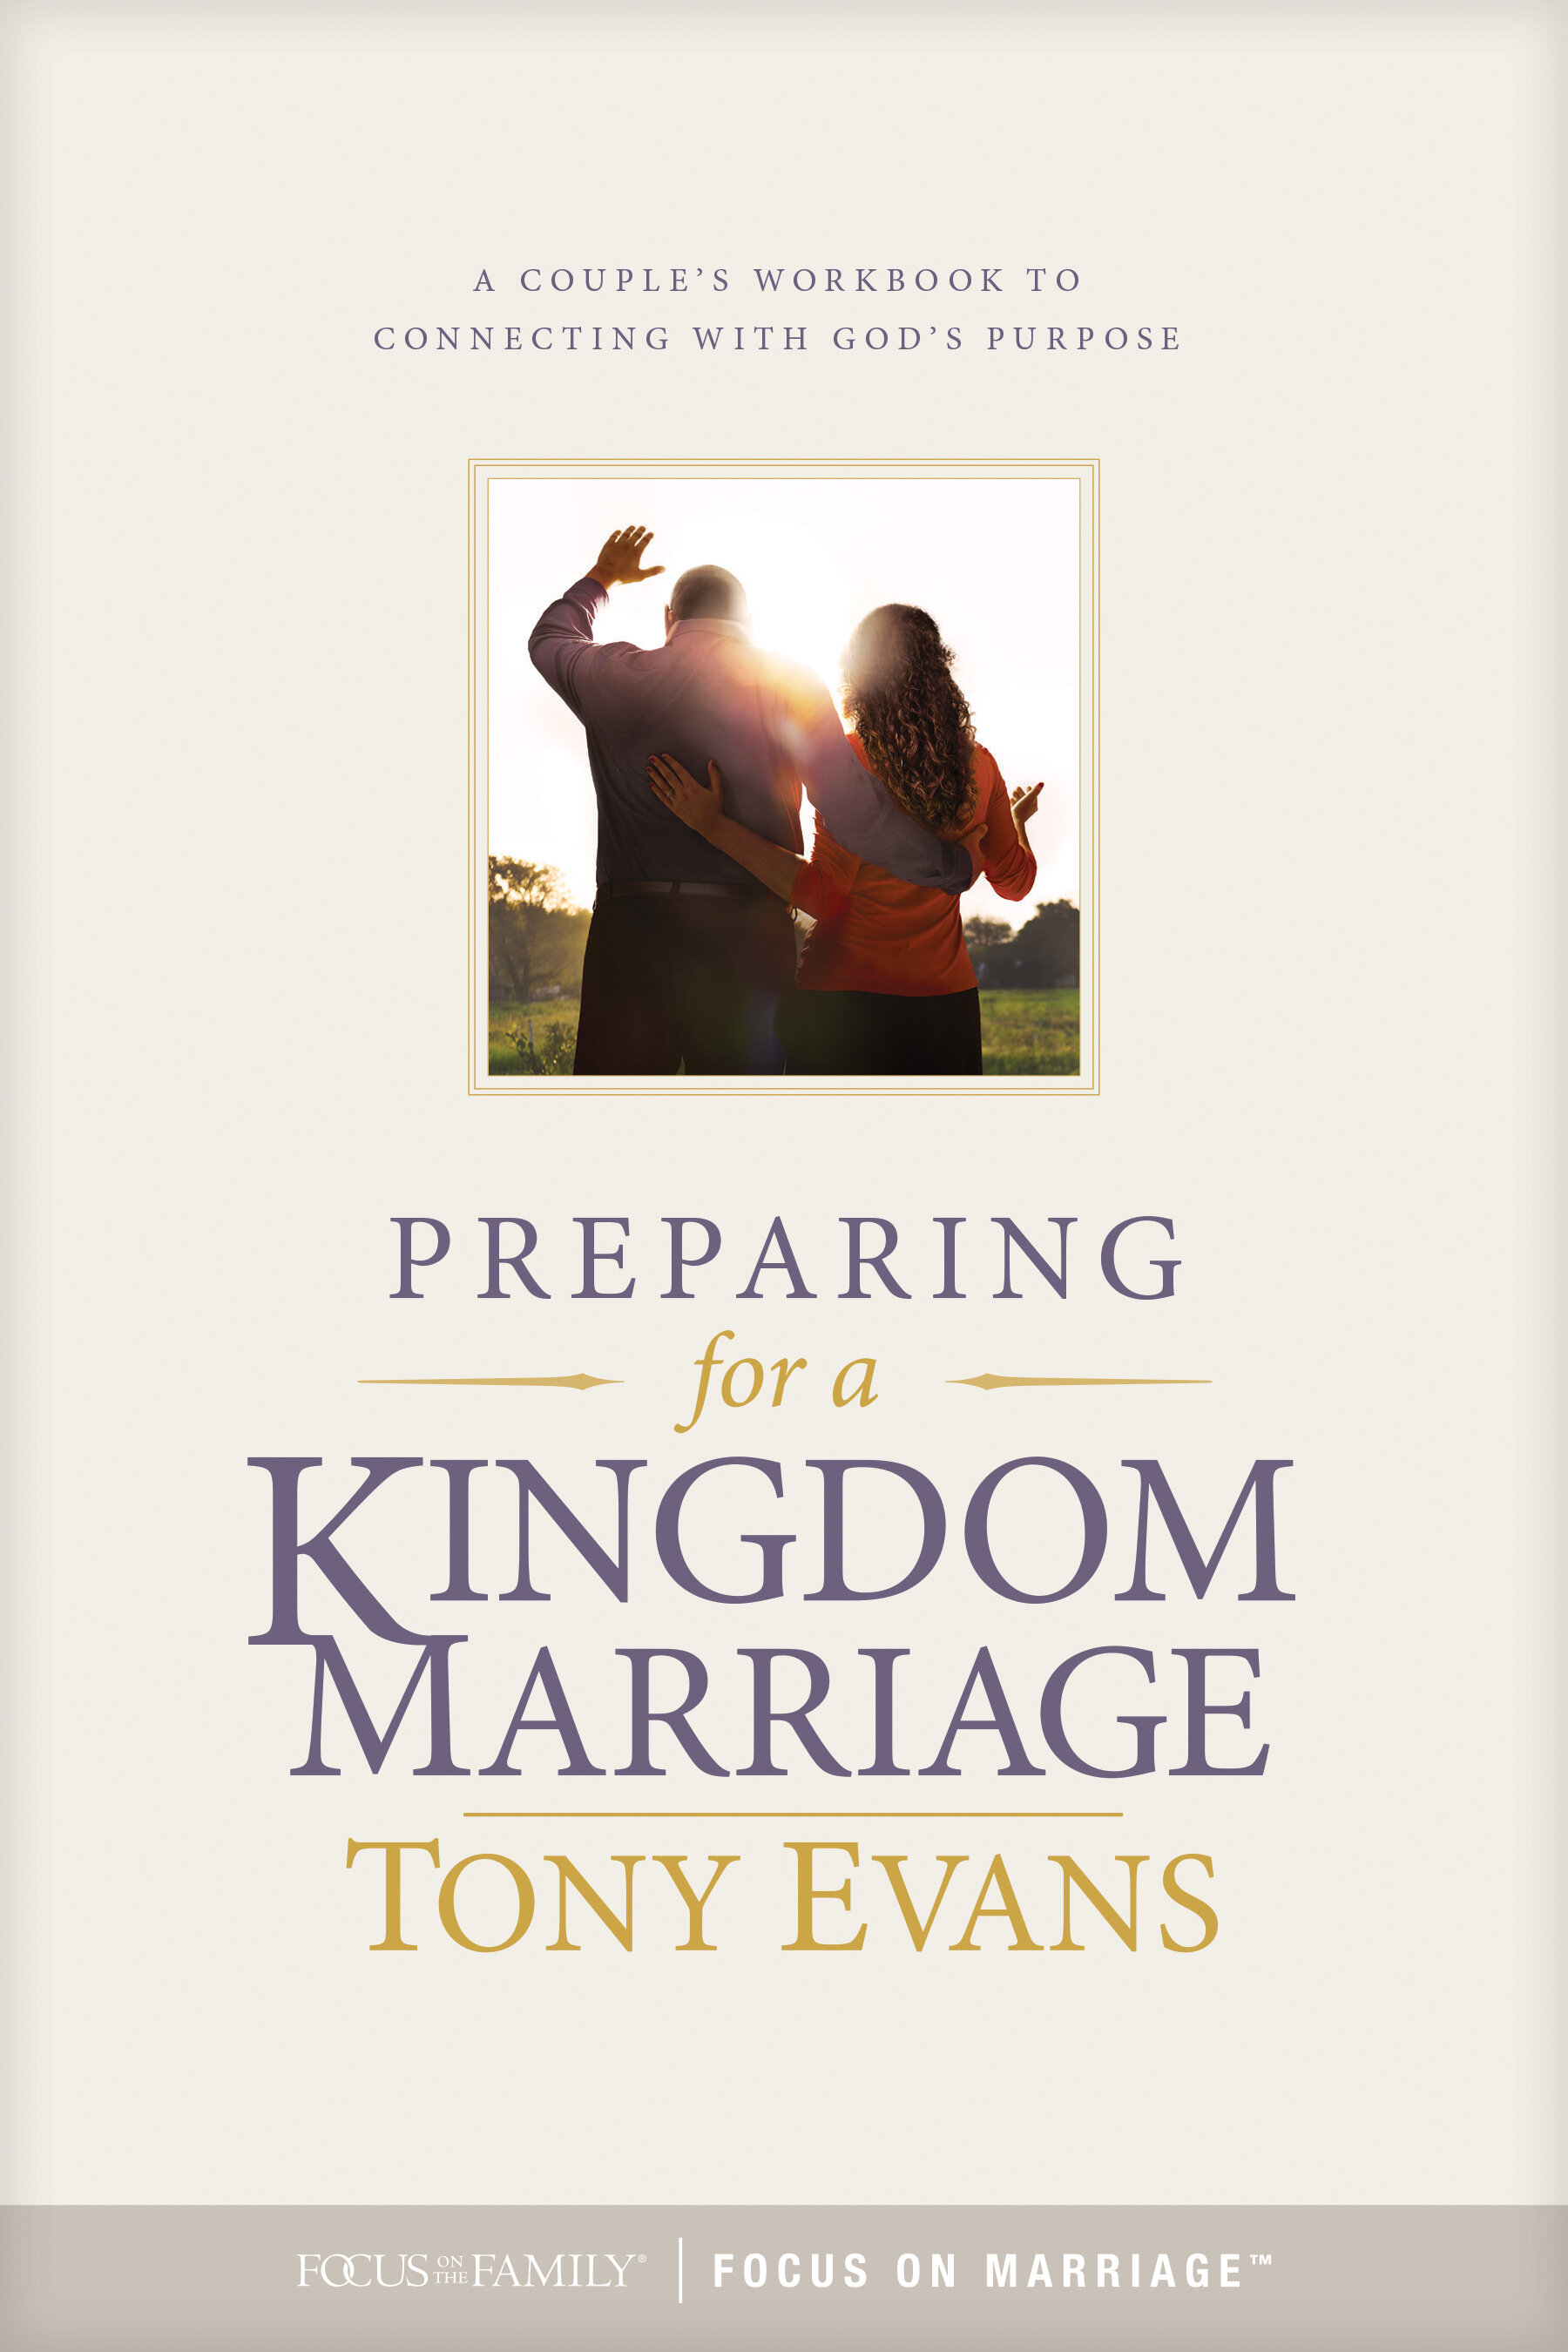 Preparing for a Kingdom Marriage: A Couple's Workbook to Connecting with God's Purpose